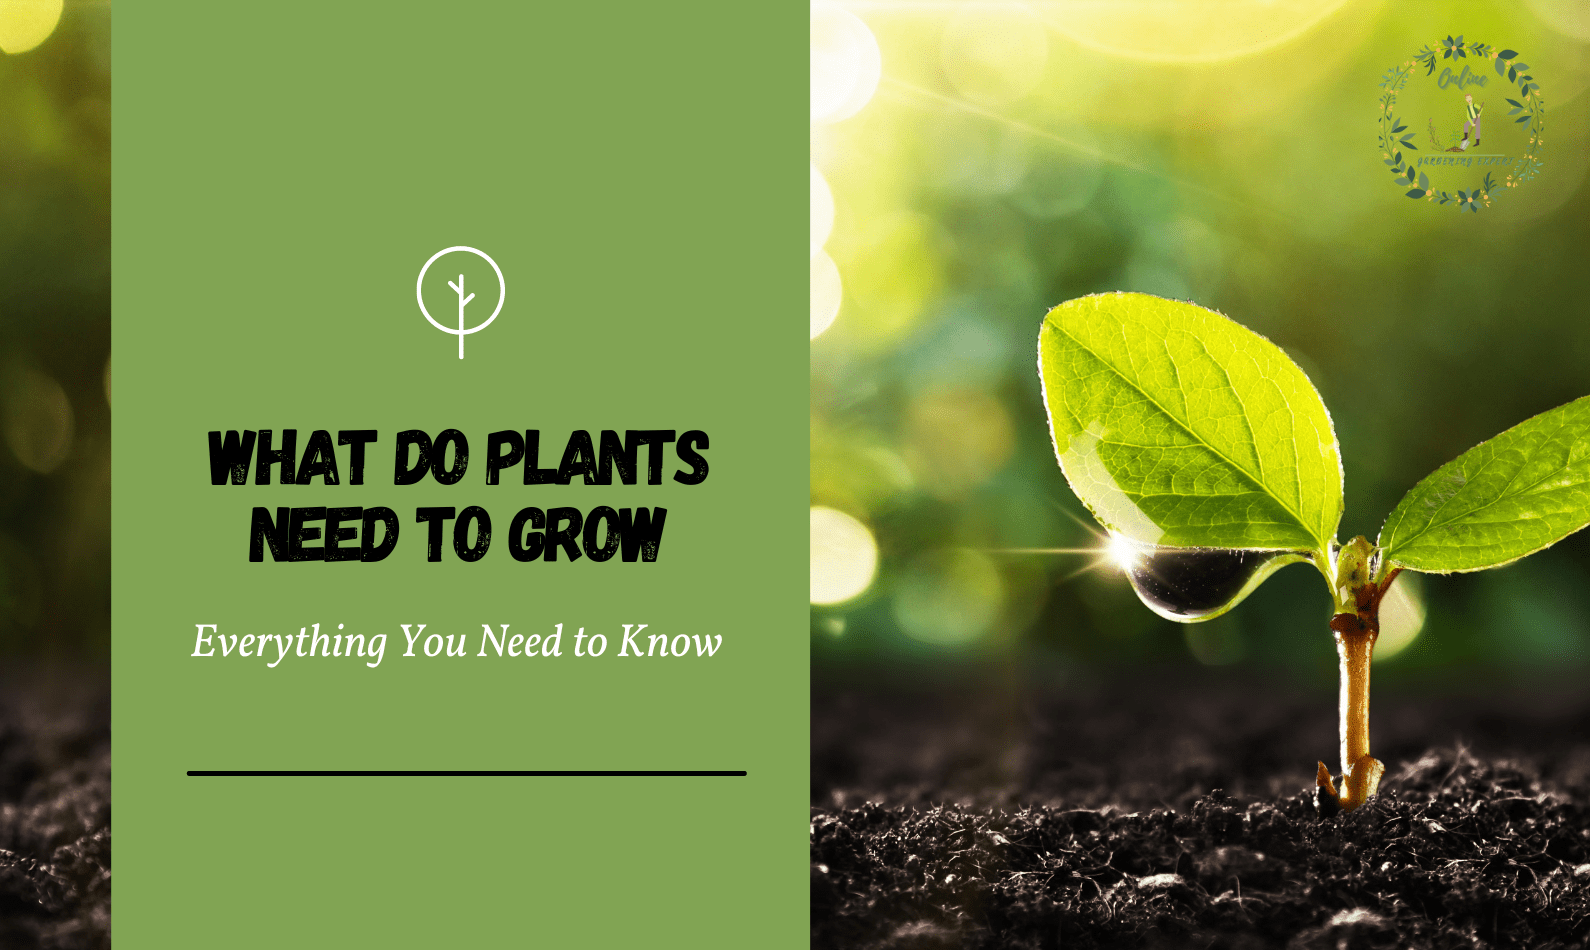 What do Plants Need to Grow